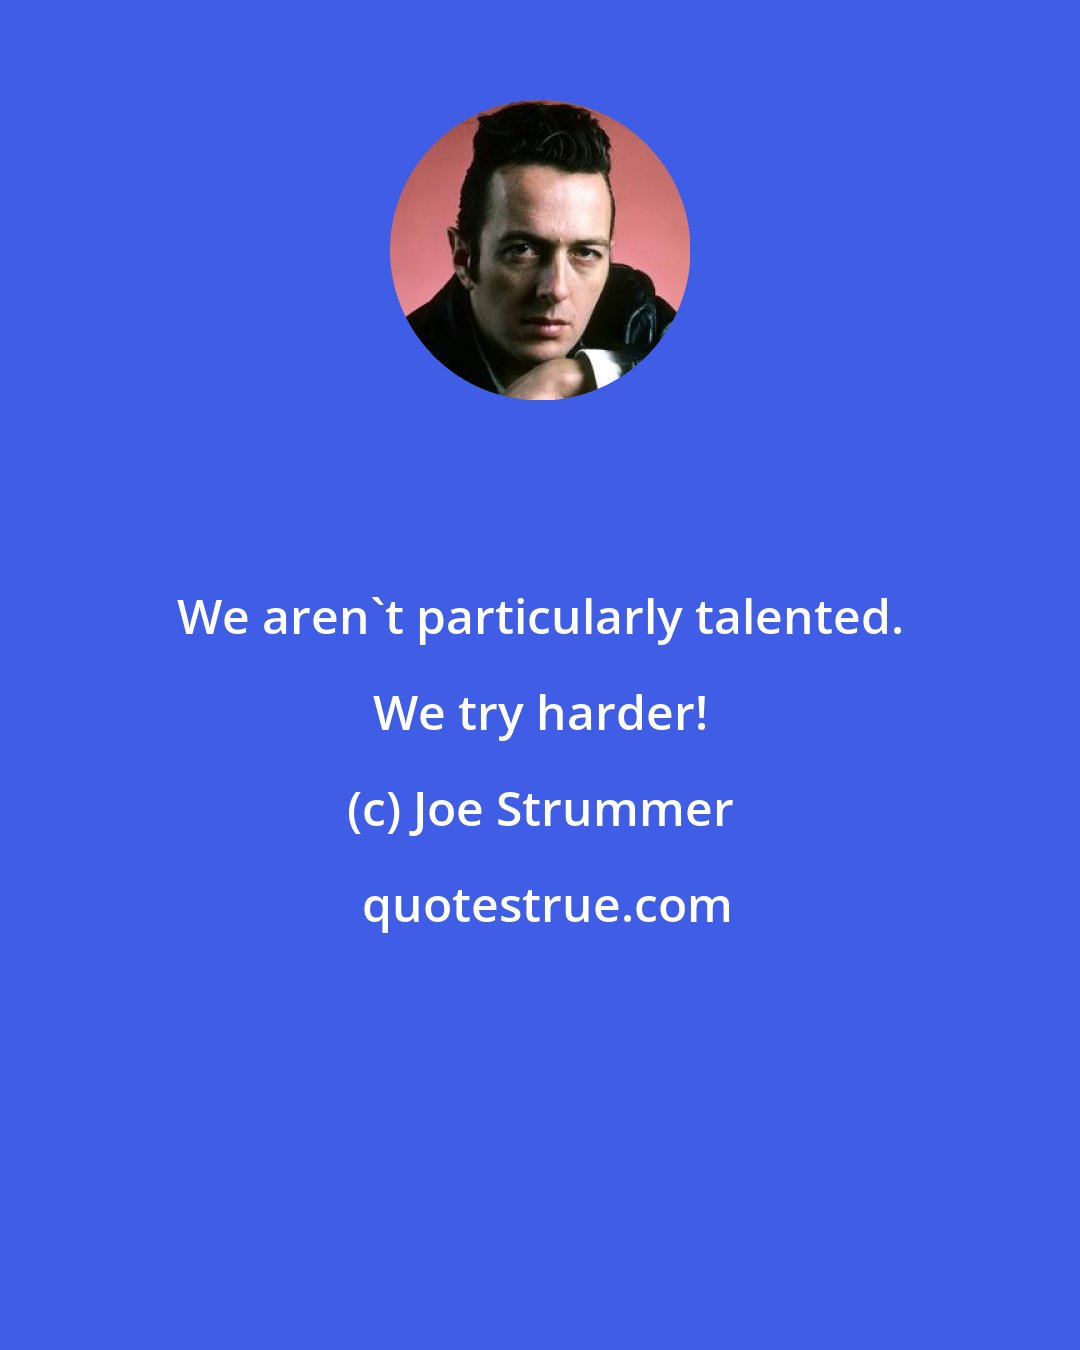 Joe Strummer: We aren't particularly talented. We try harder!